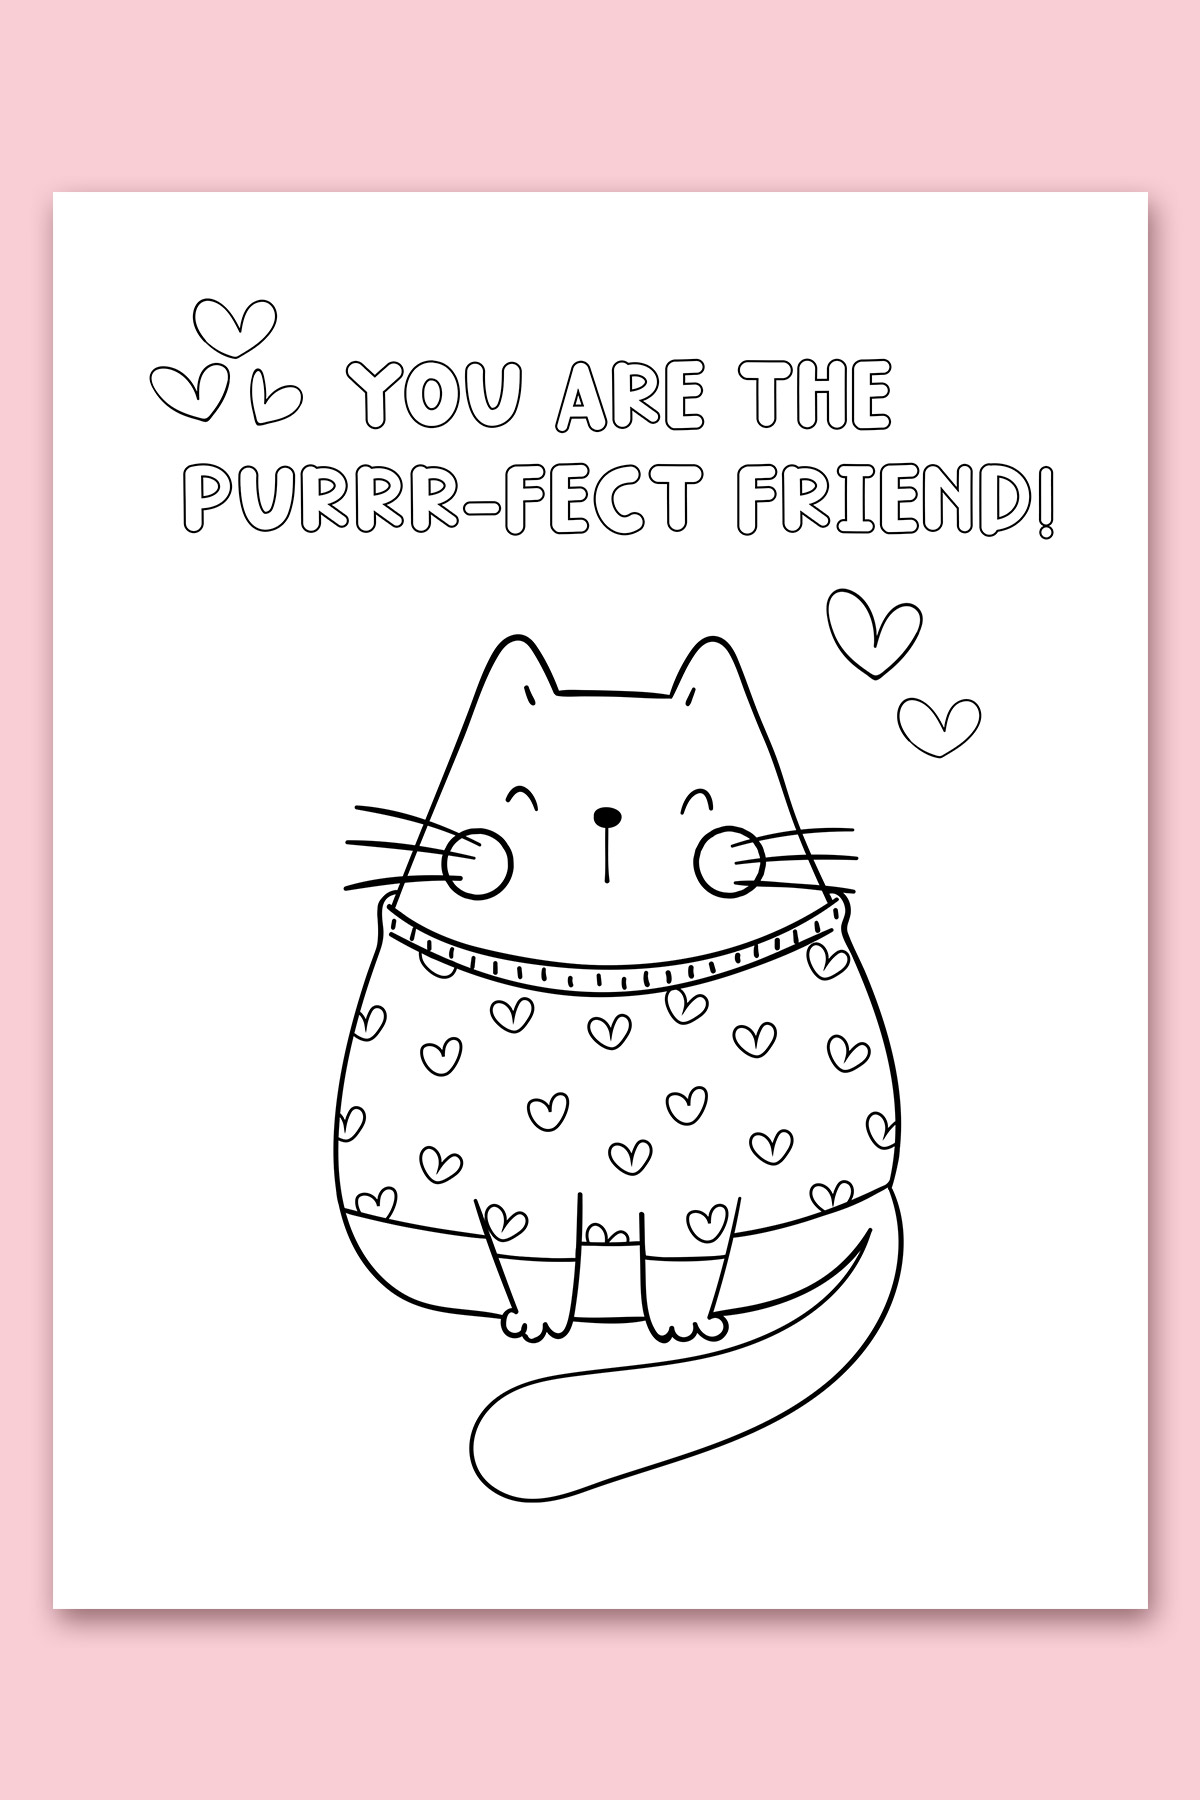 This image shows one of the free printable coloring Valentine cards for kids. This image shows a cat in a heart sweater and says you are purrr-fect friend.